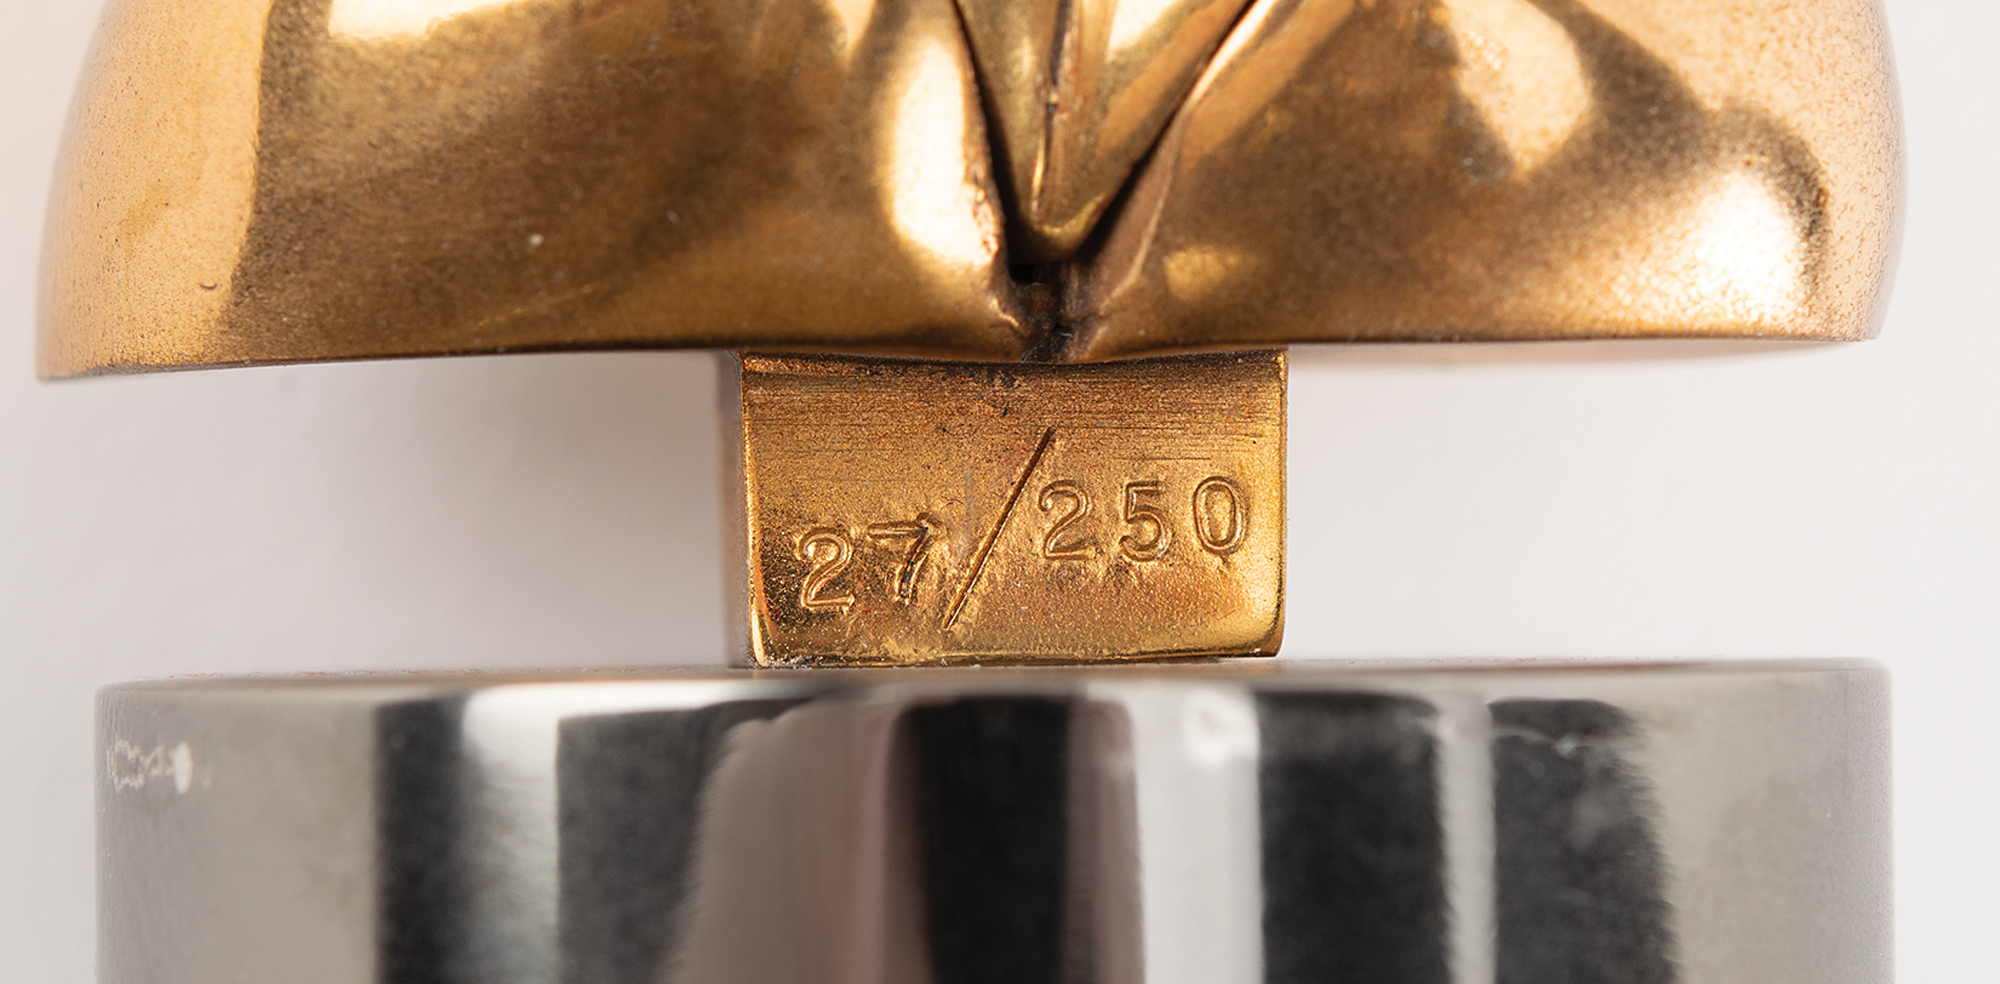 Lot #4296 Olympic Torso Bronze Puzzle Sculpture (1986) Presented to IOC Member James Worrall - Image 7